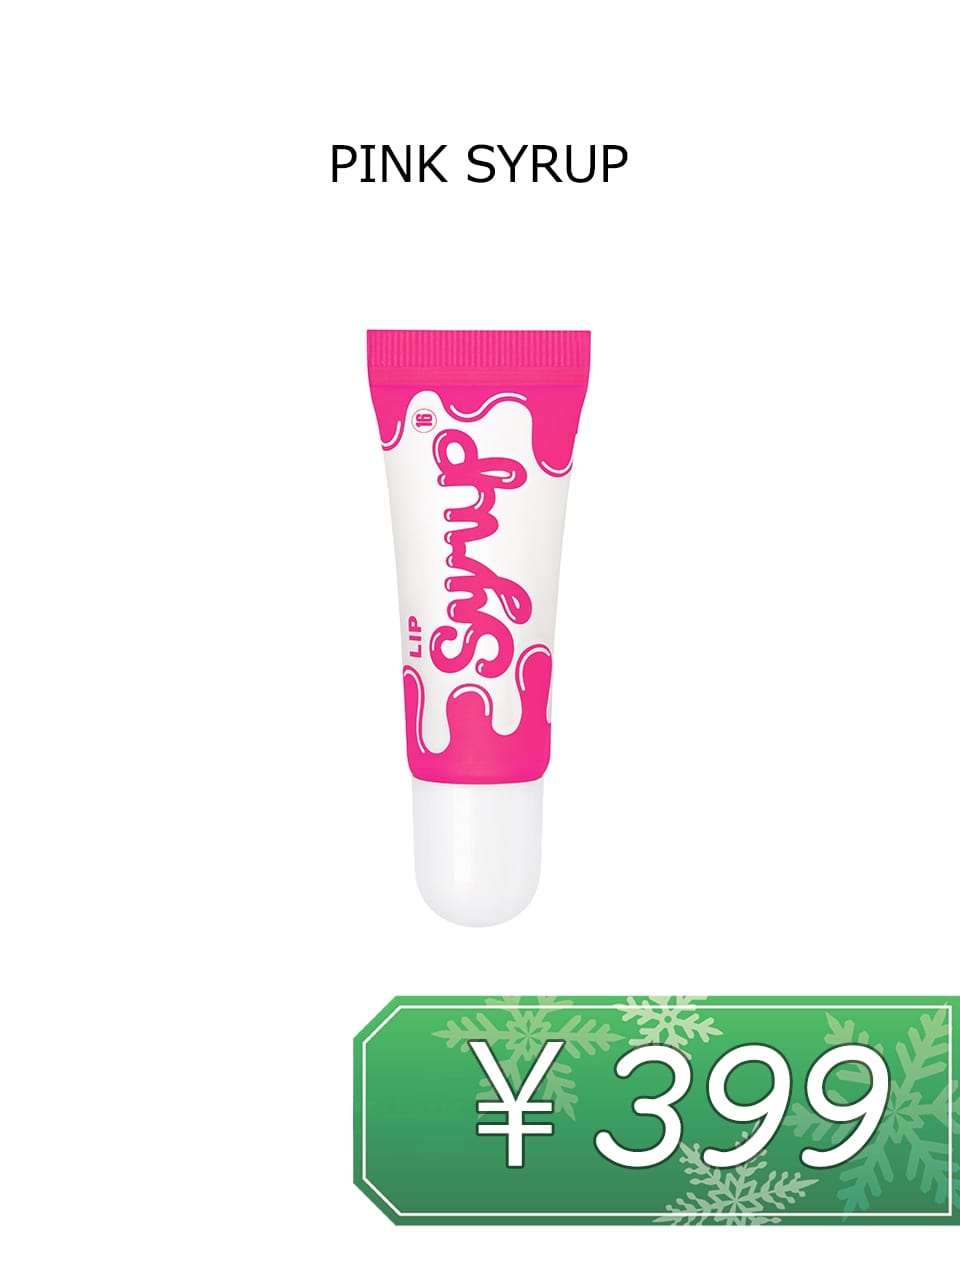 【16brand】LIP SYRUP(PINK SYRUP)【1408円⇒《特価》399円】